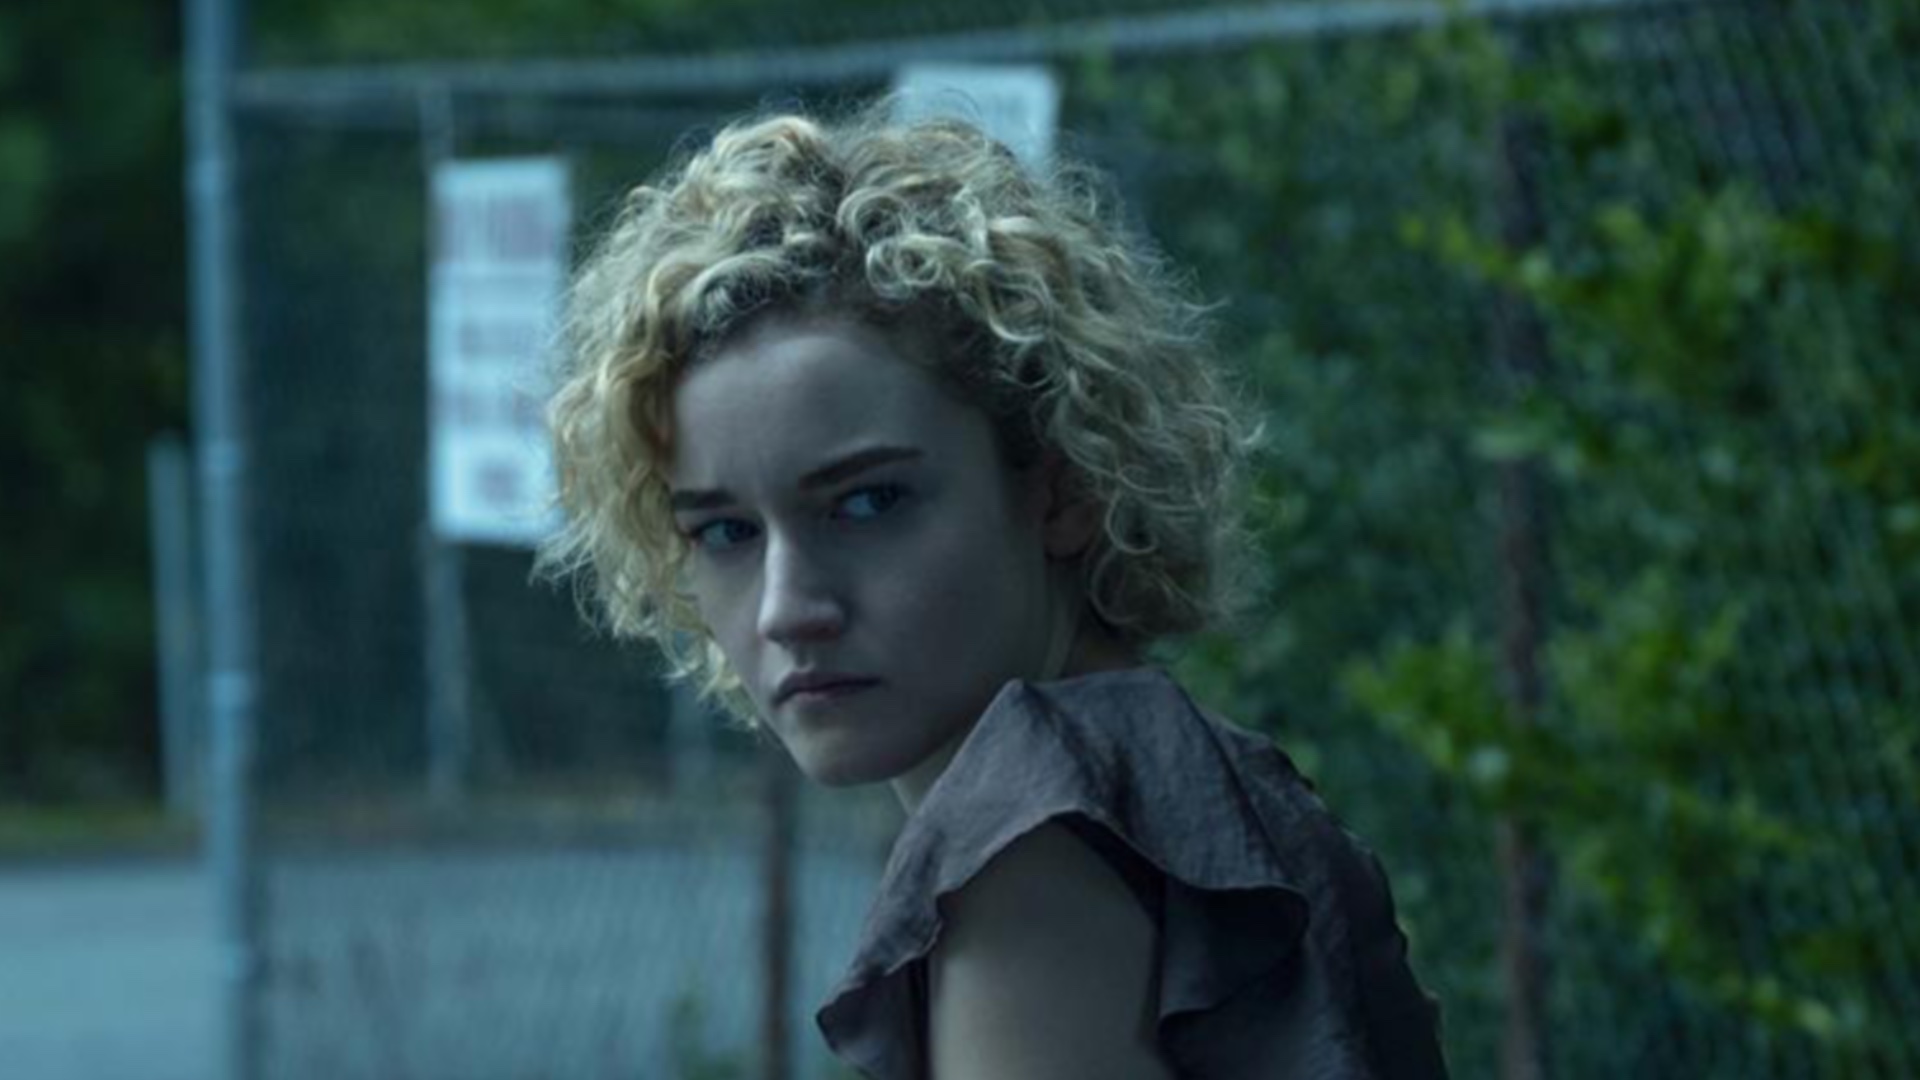 the mcu fantastic four movie may be setting up all the pieces to bring in doctor doom and mephisto with julia garner's silver surfer shalla-bal